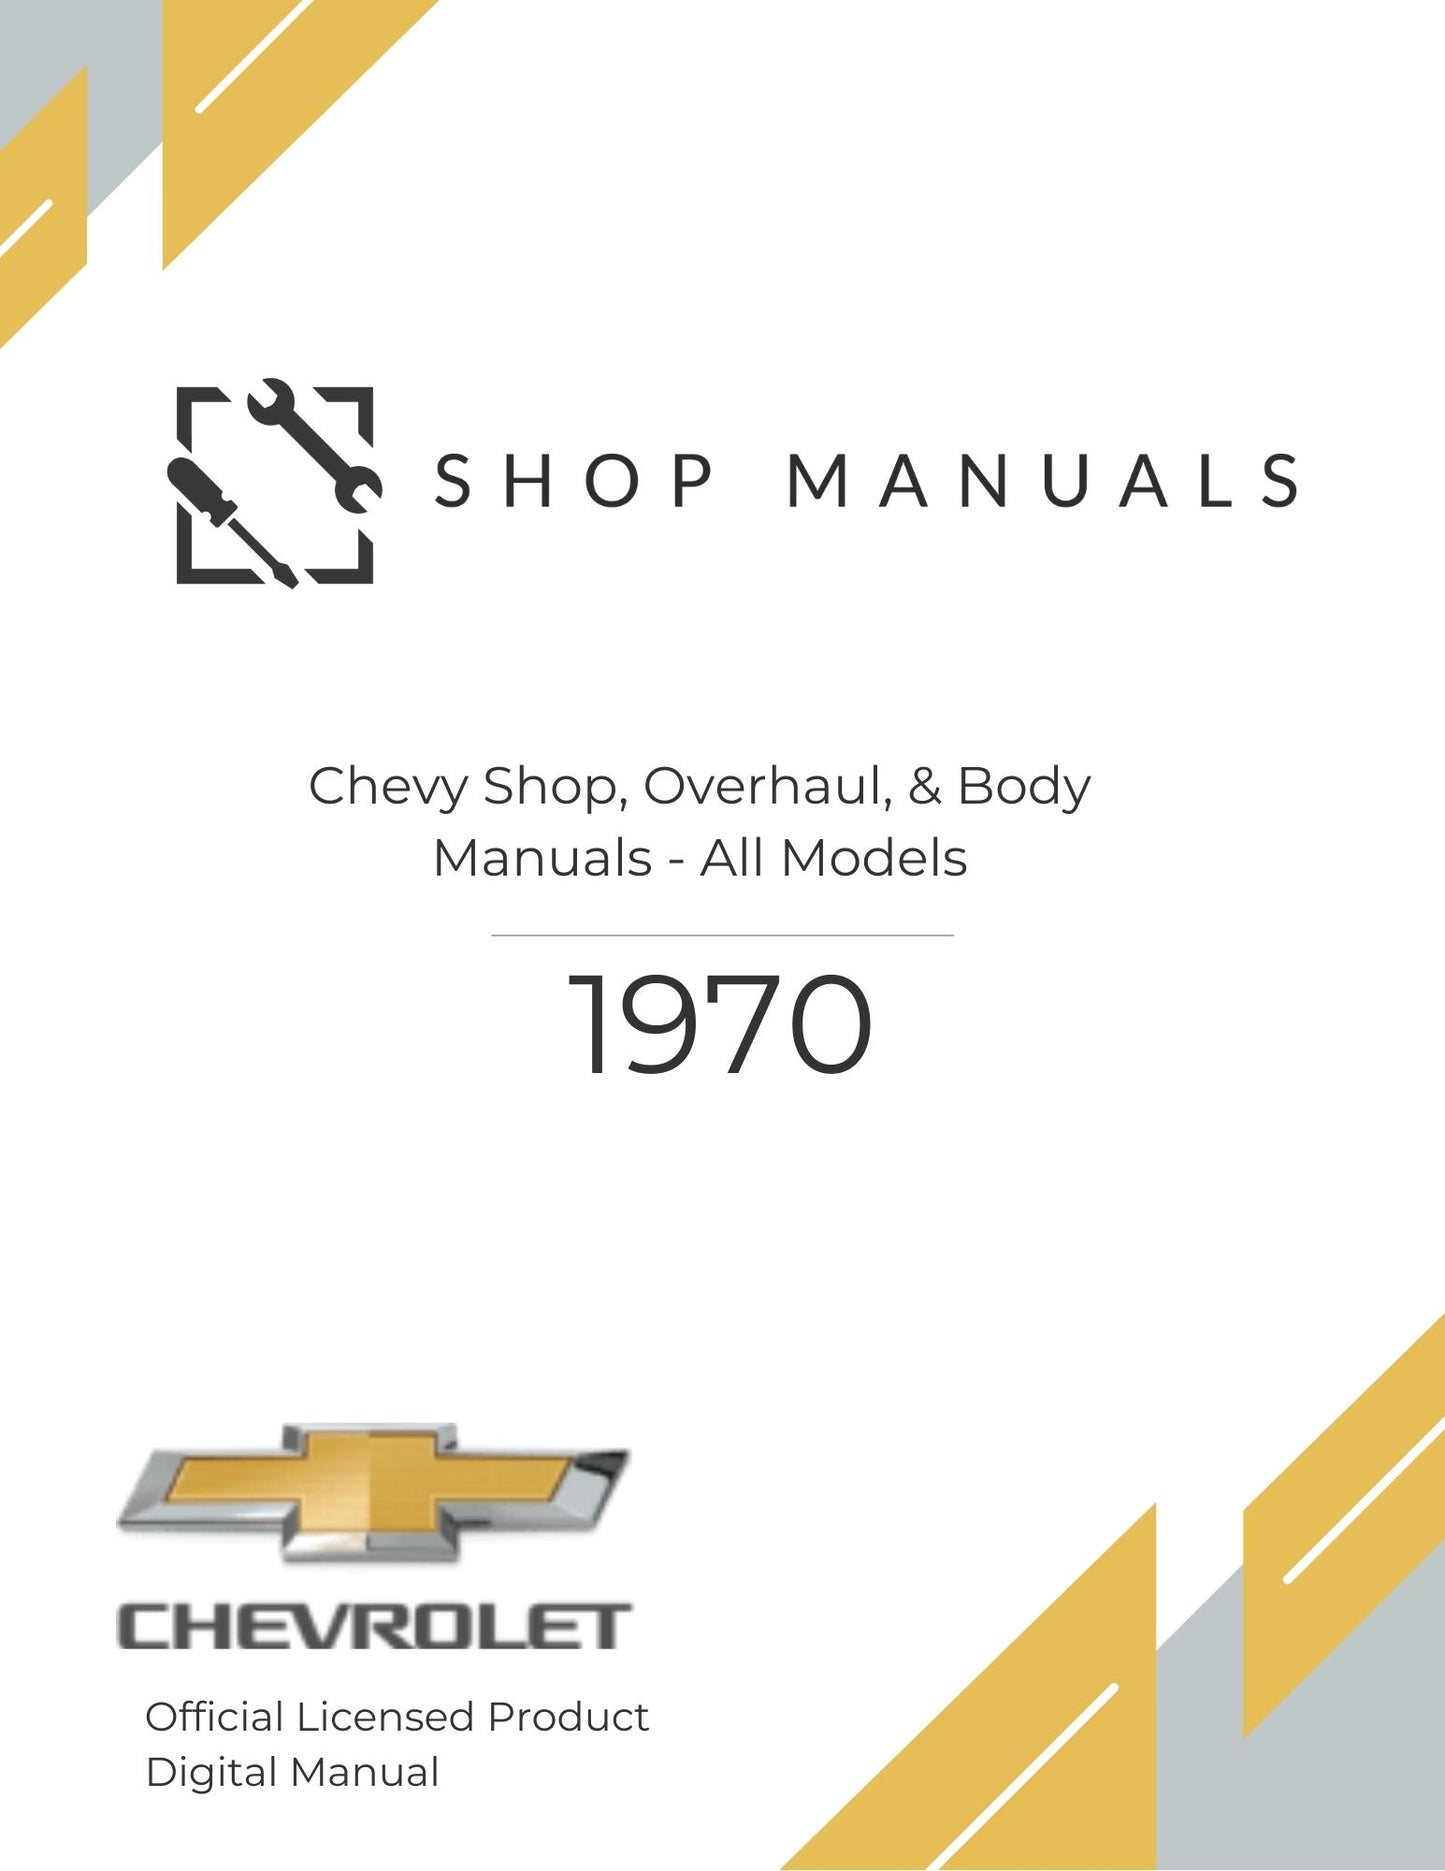 1970 Chevy Shop, Overhaul, & Body Manuals - All Models